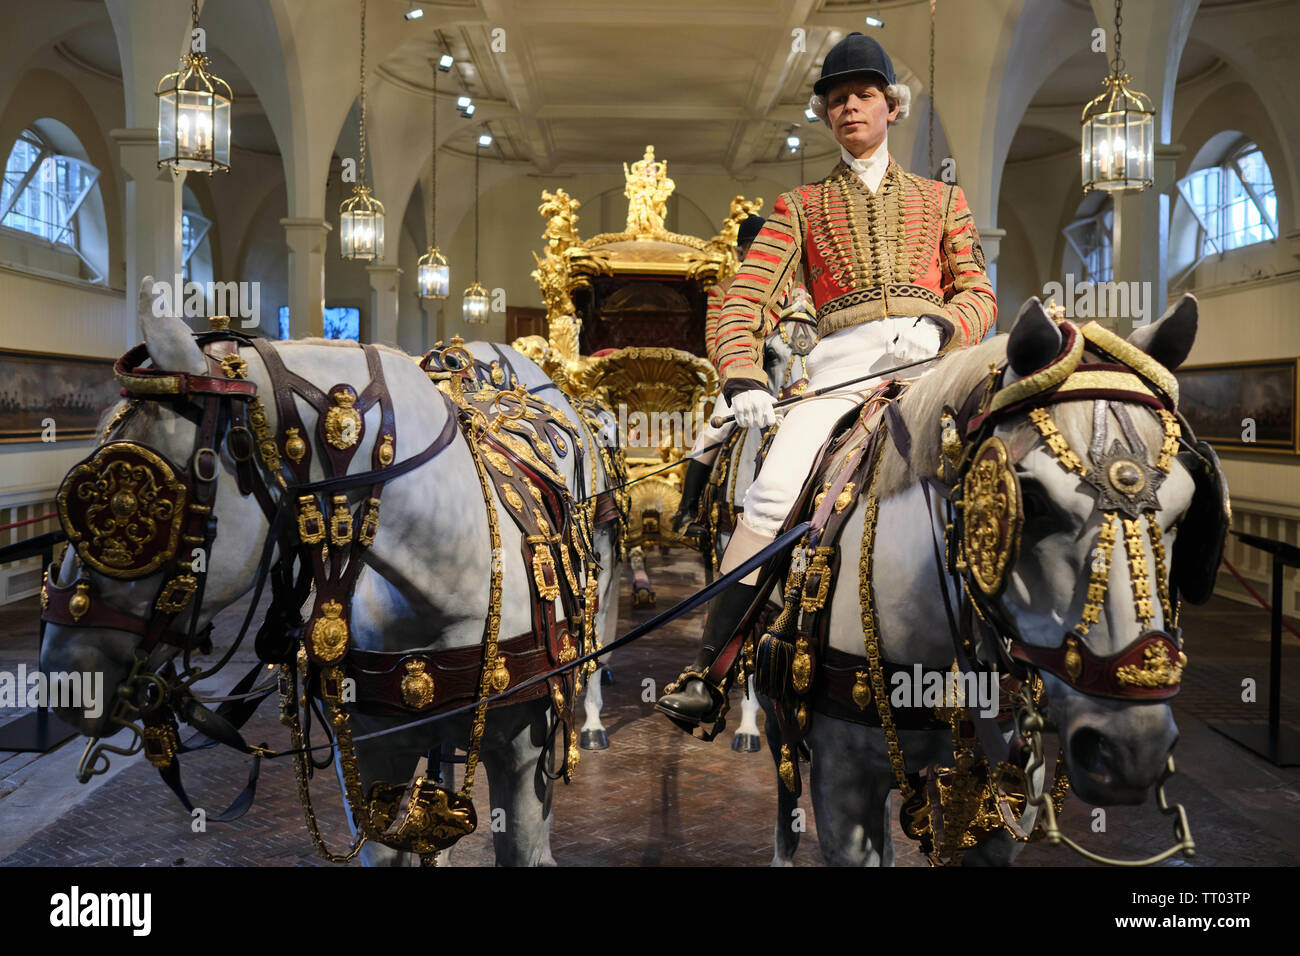 Royal carriages and coaches at The Royal Mews, Buckingham Palace, London, England, UK. Stock Photo